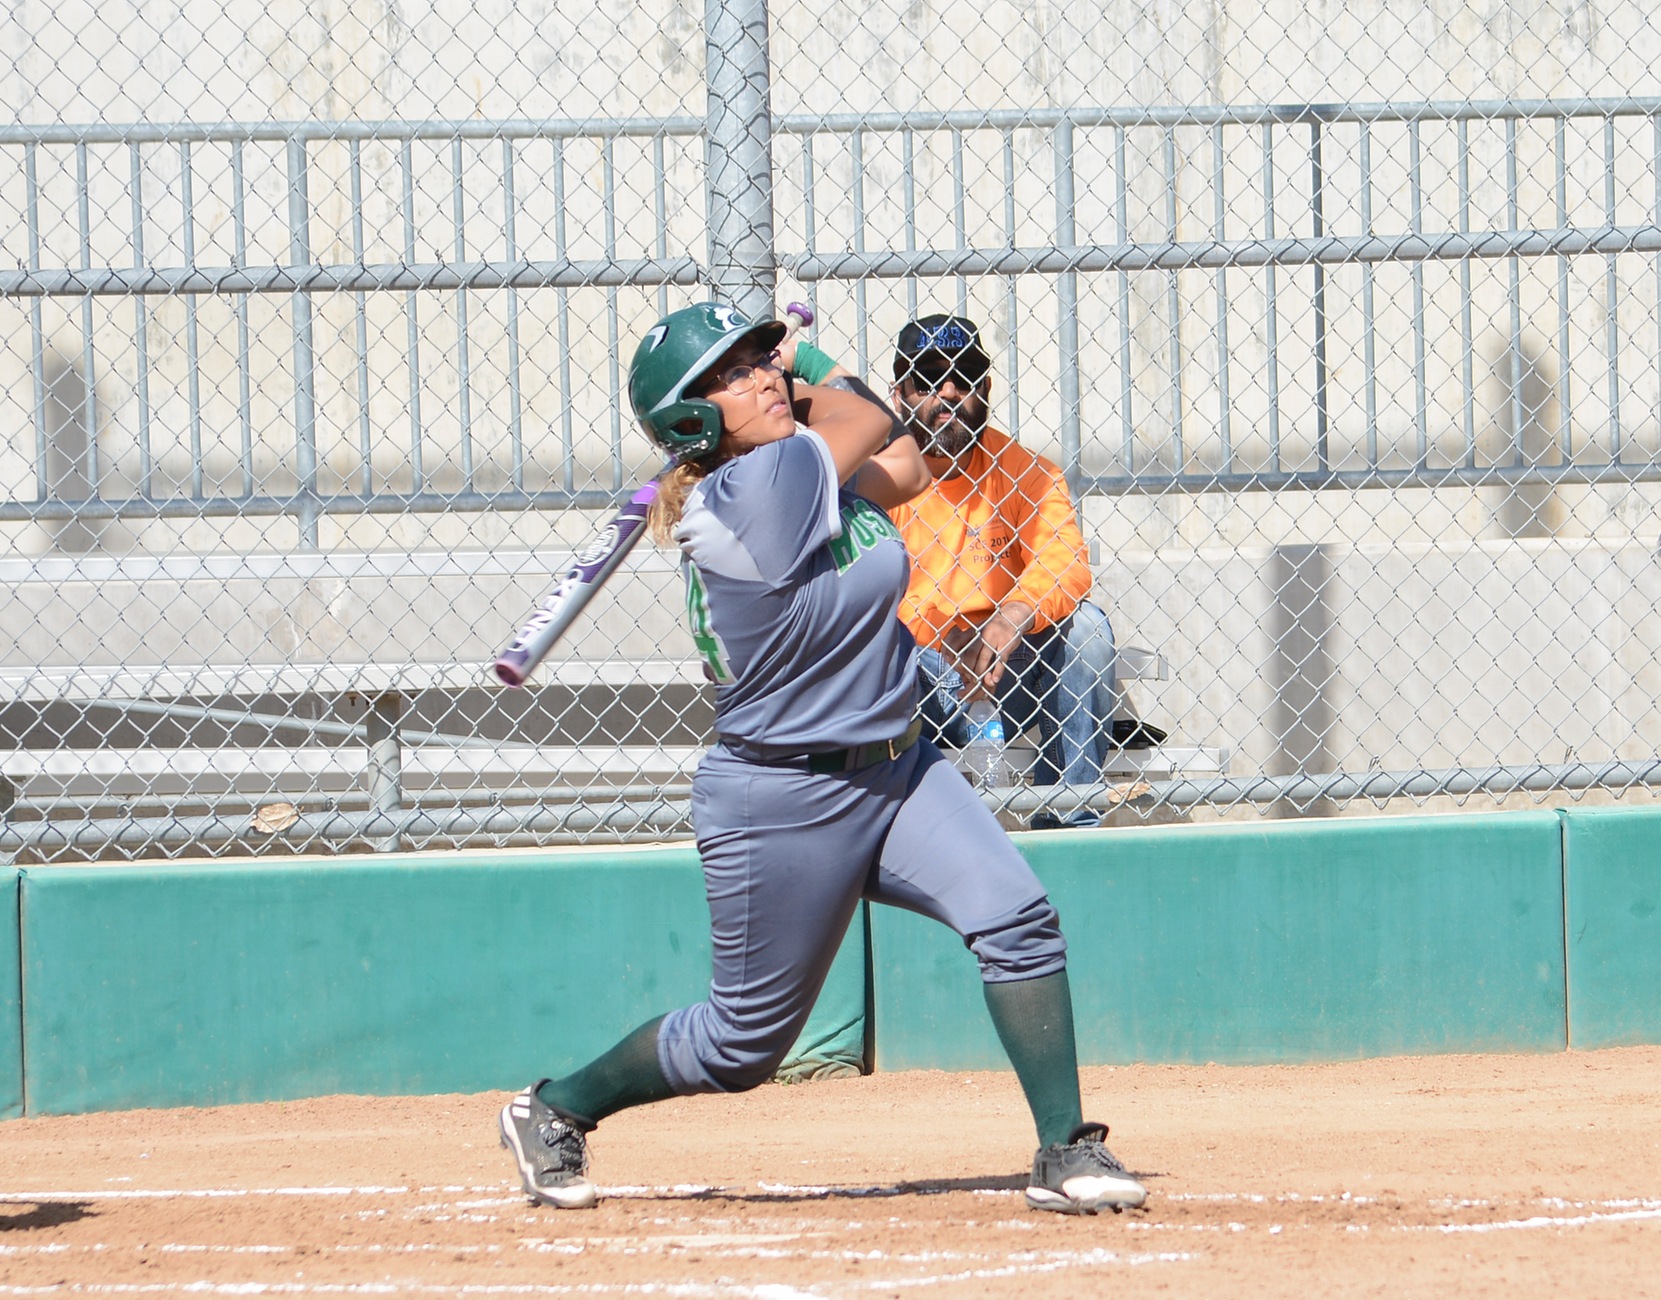 The East Los Angeles College softball team outhit Chaffey College 11-9 in a 6-5 Husky win in April 20 at home. (Photo by Tadzio Garcia)